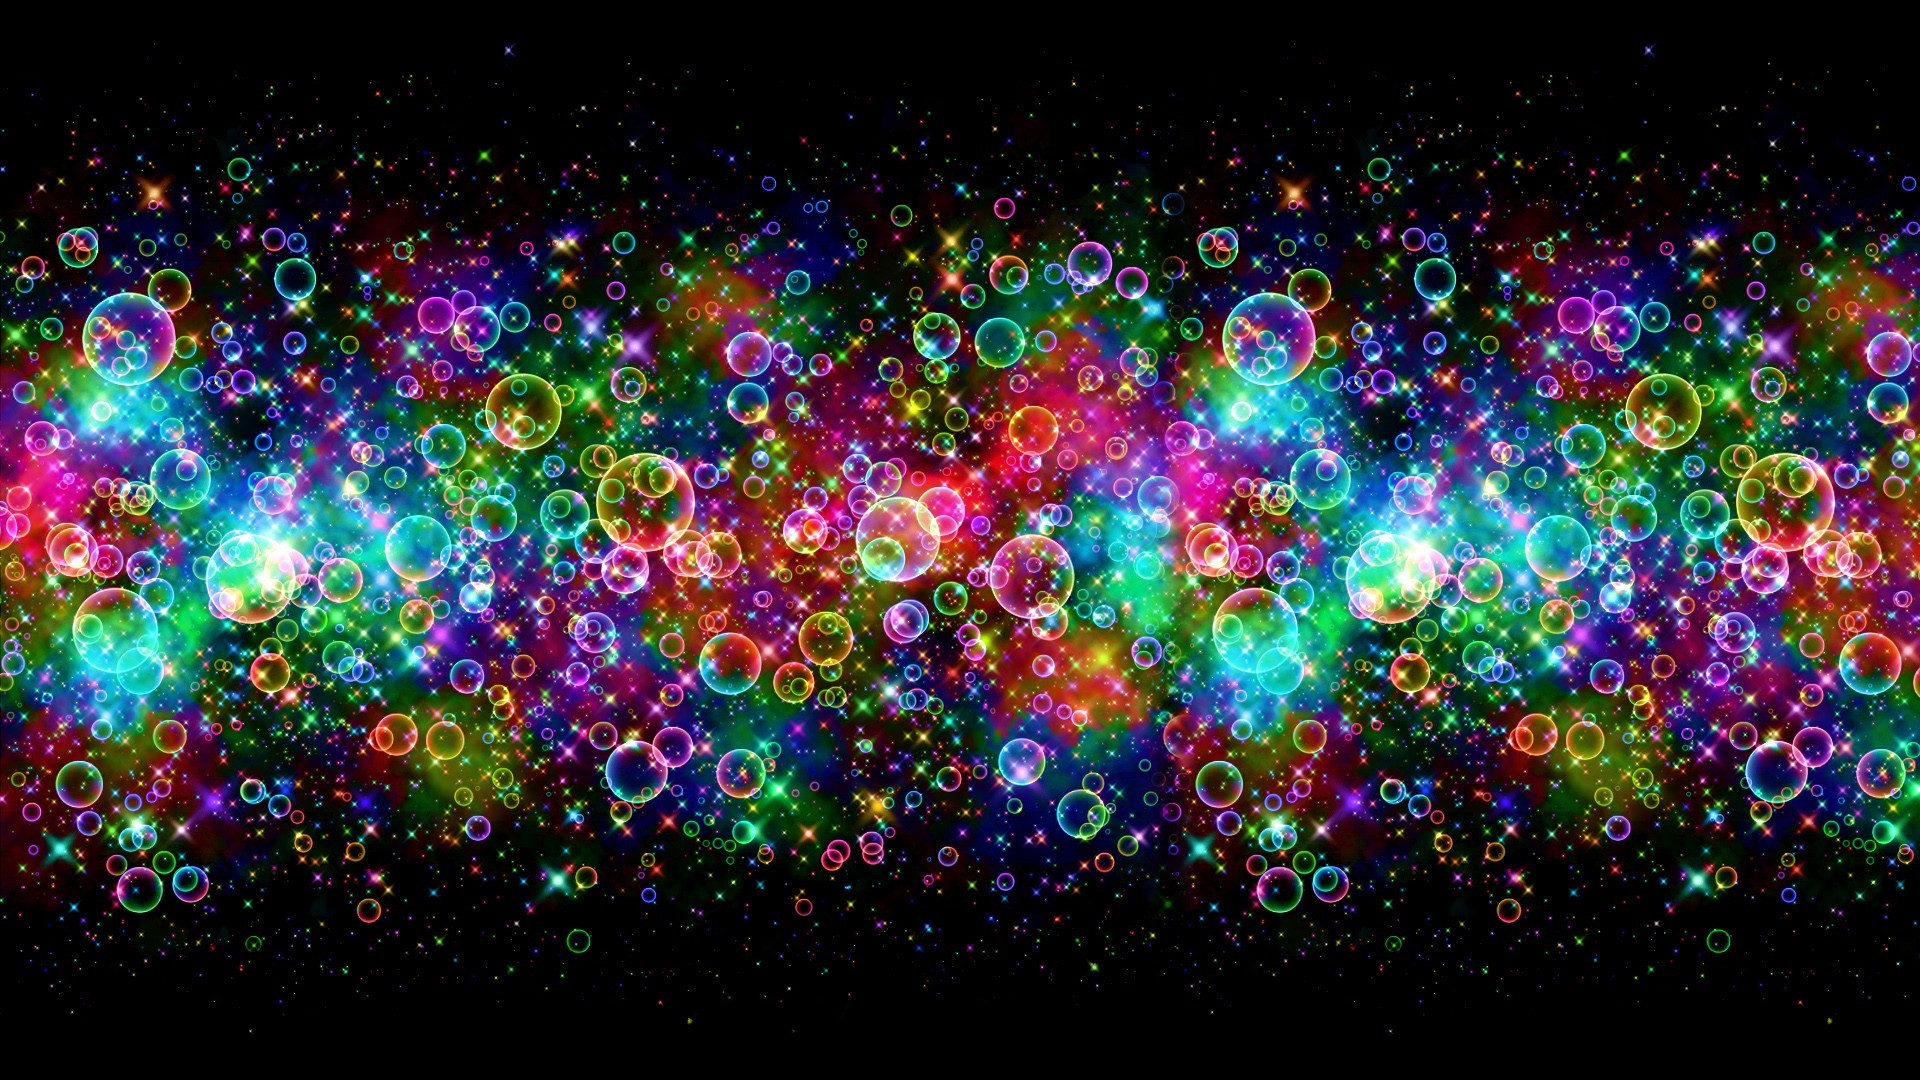 1920x1080 Colorful Abstract Wallpaper HD – Free wallpaper download